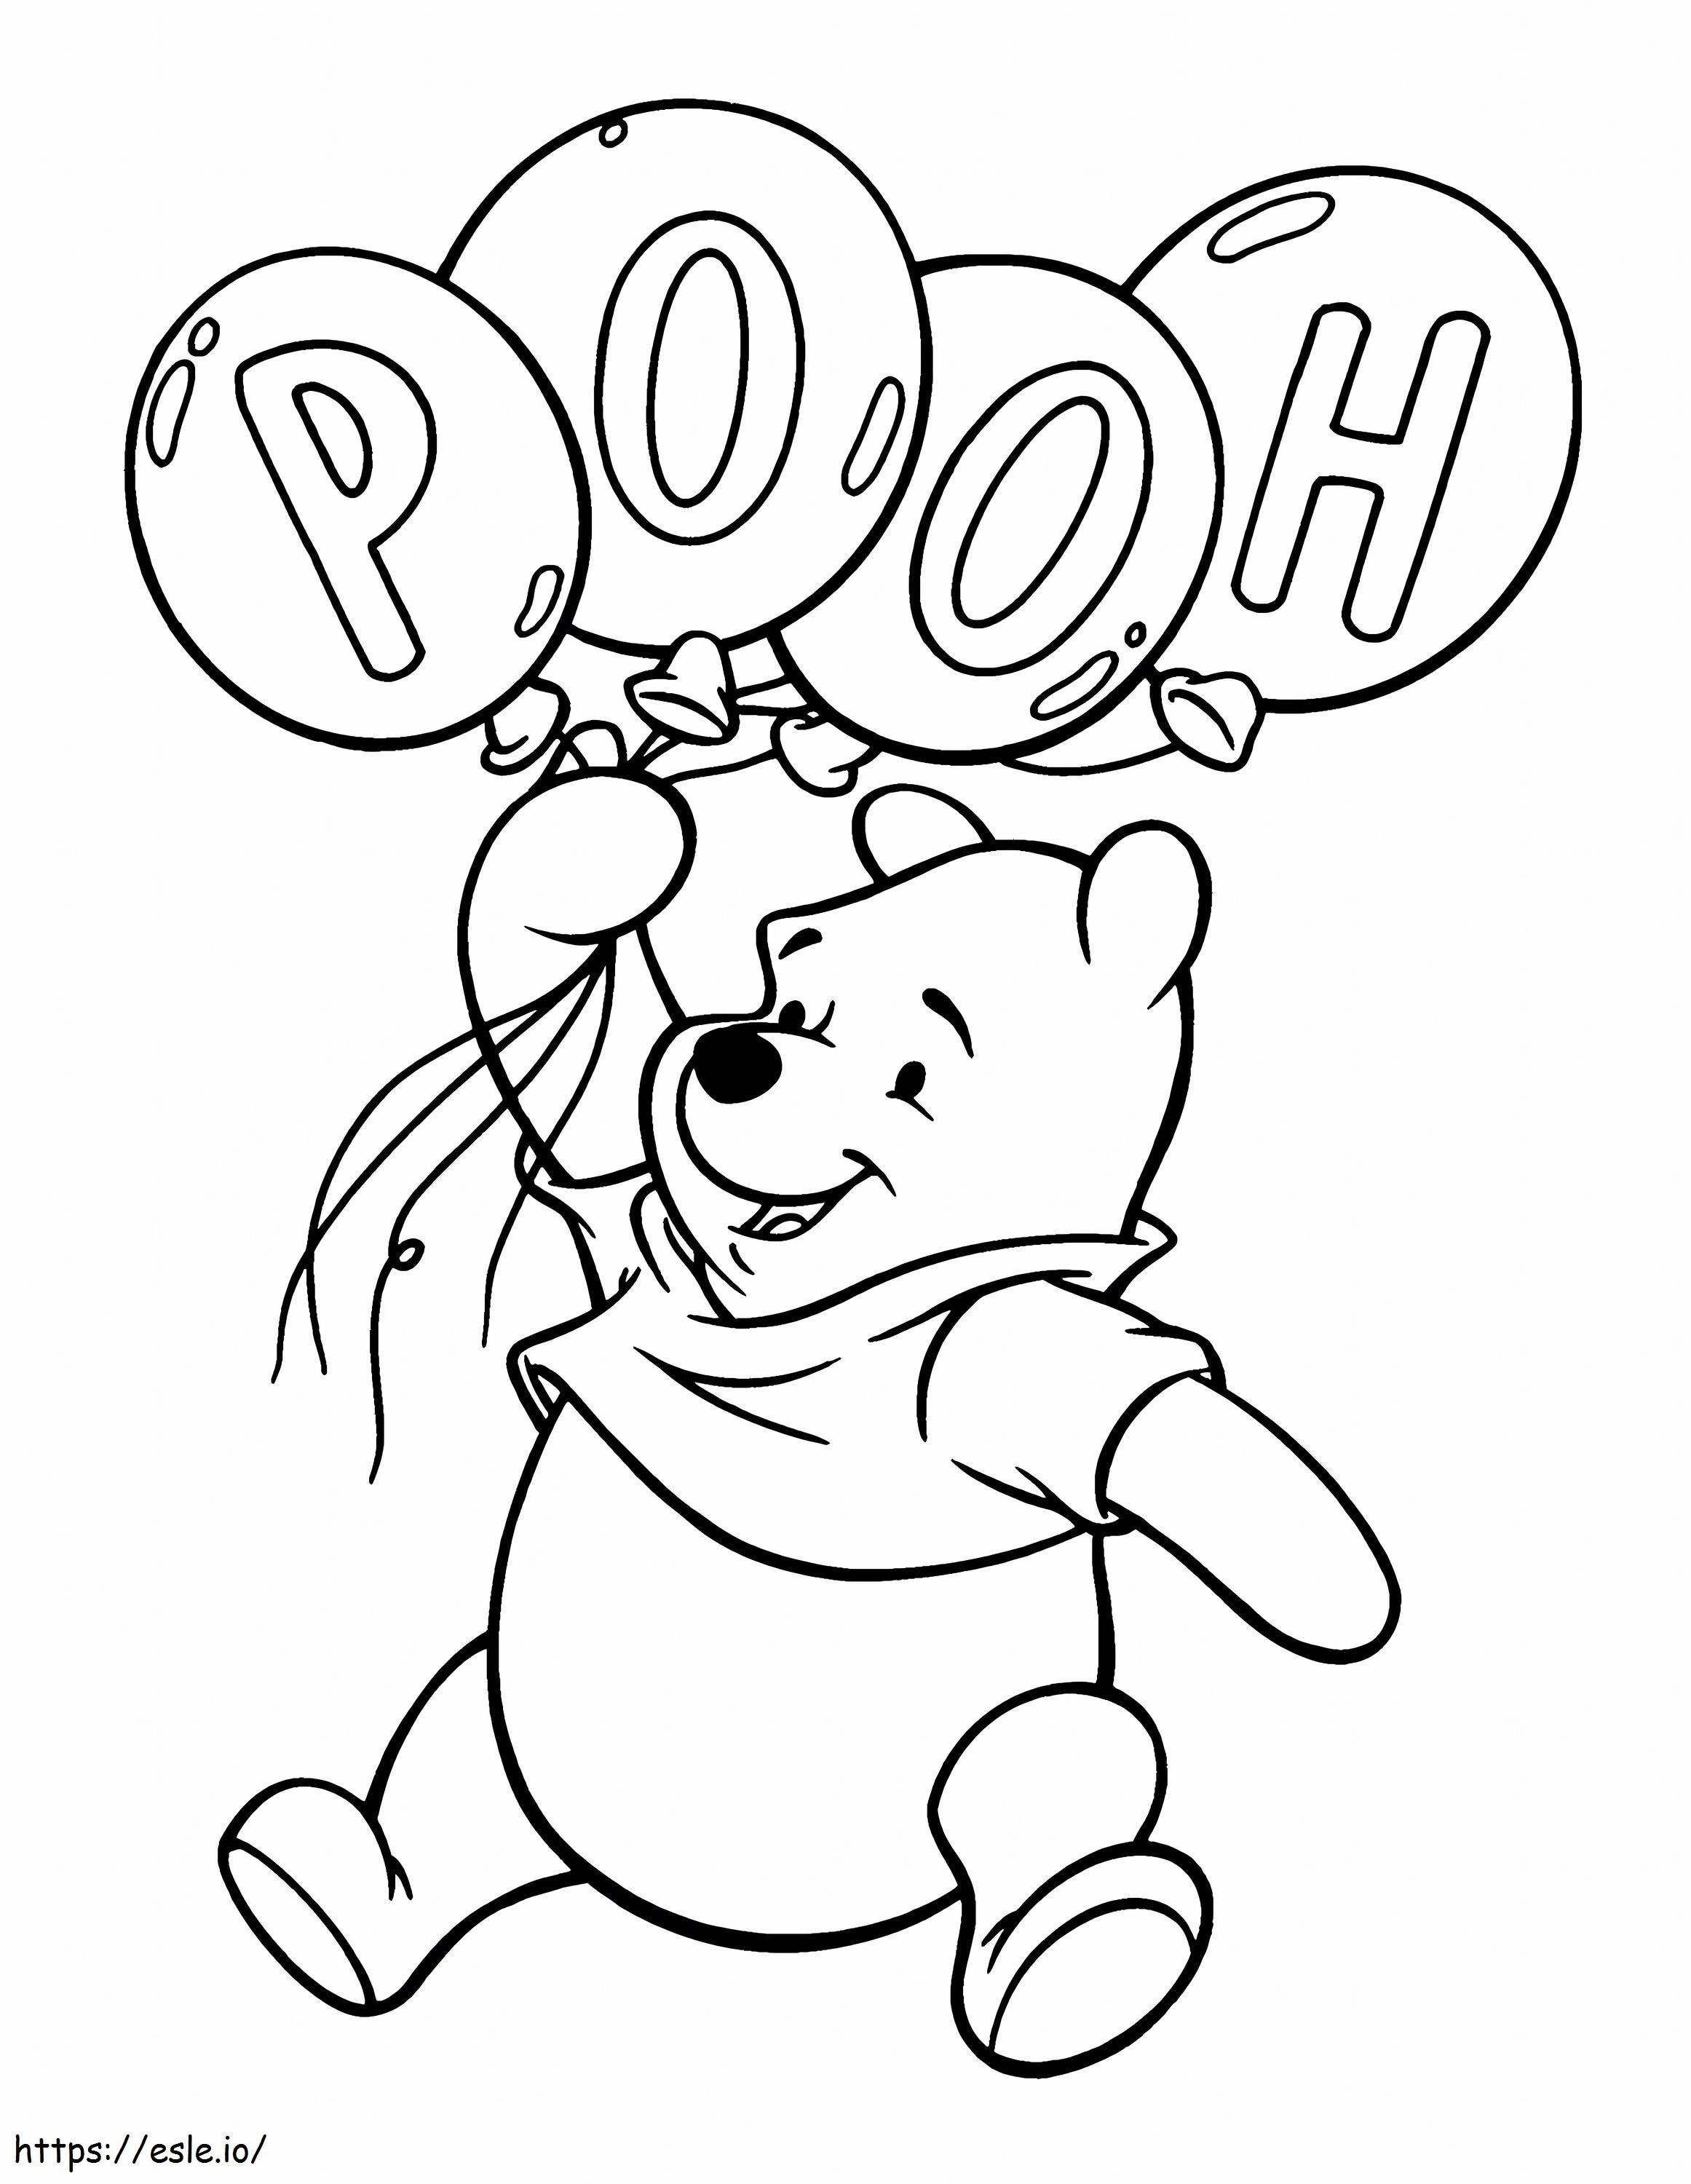 Winnie The Pooh Holding Balloons coloring page